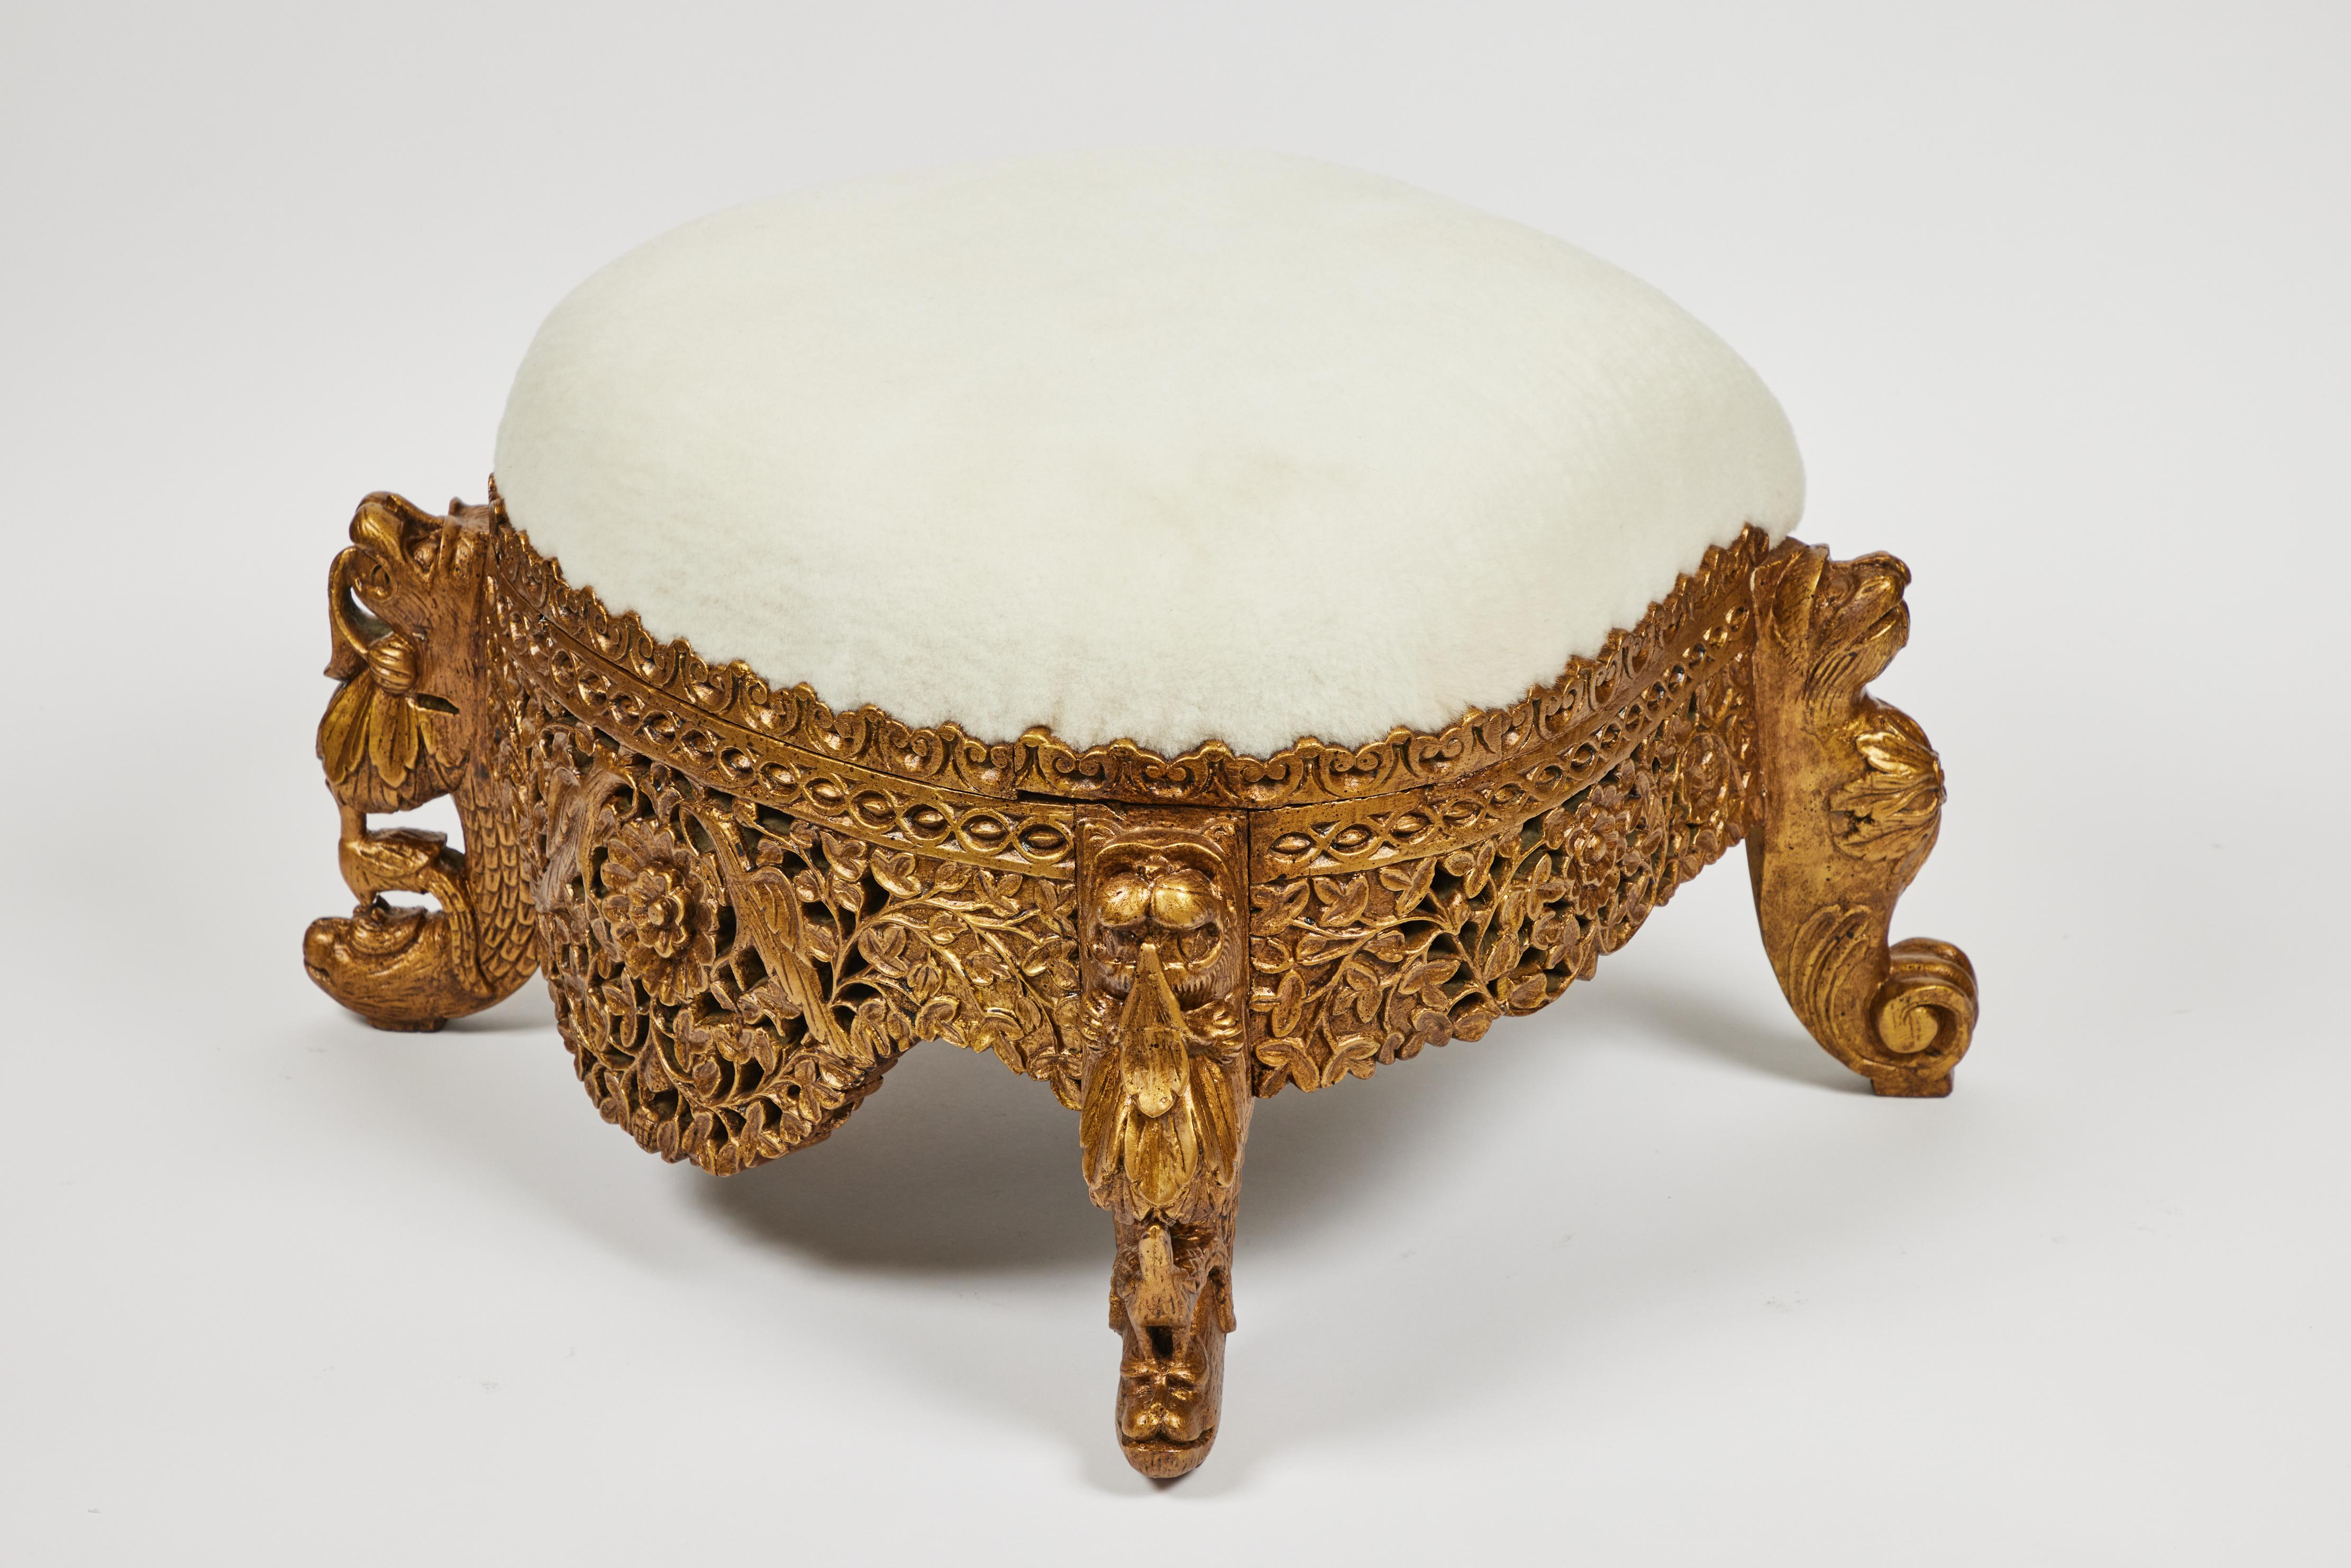 This elaborately carved wood foot stool with it's hand painted rich gold finish is newly upholstered in fluffy white shearling and 

Measures: 22.5